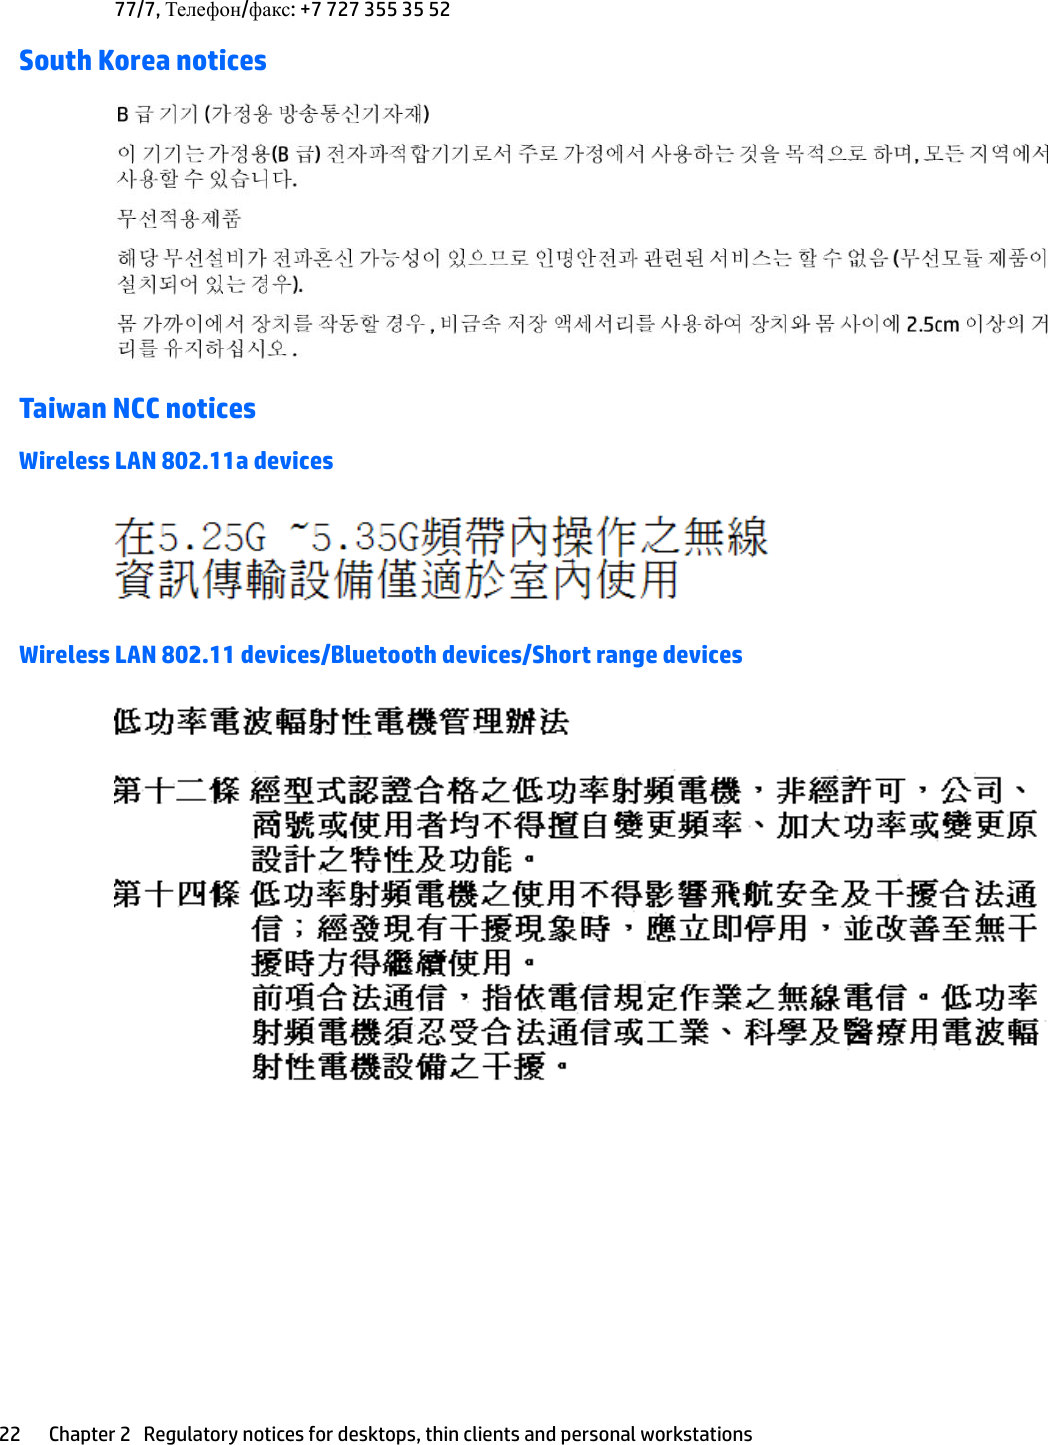 77/7, Телефон/факс: +7 727 355 35 52South Korea noticesTaiwan NCC noticesWireless LAN 802.11a devicesWireless LAN 802.11 devices/Bluetooth devices/Short range devices22 Chapter 2   Regulatory notices for desktops, thin clients and personal workstations